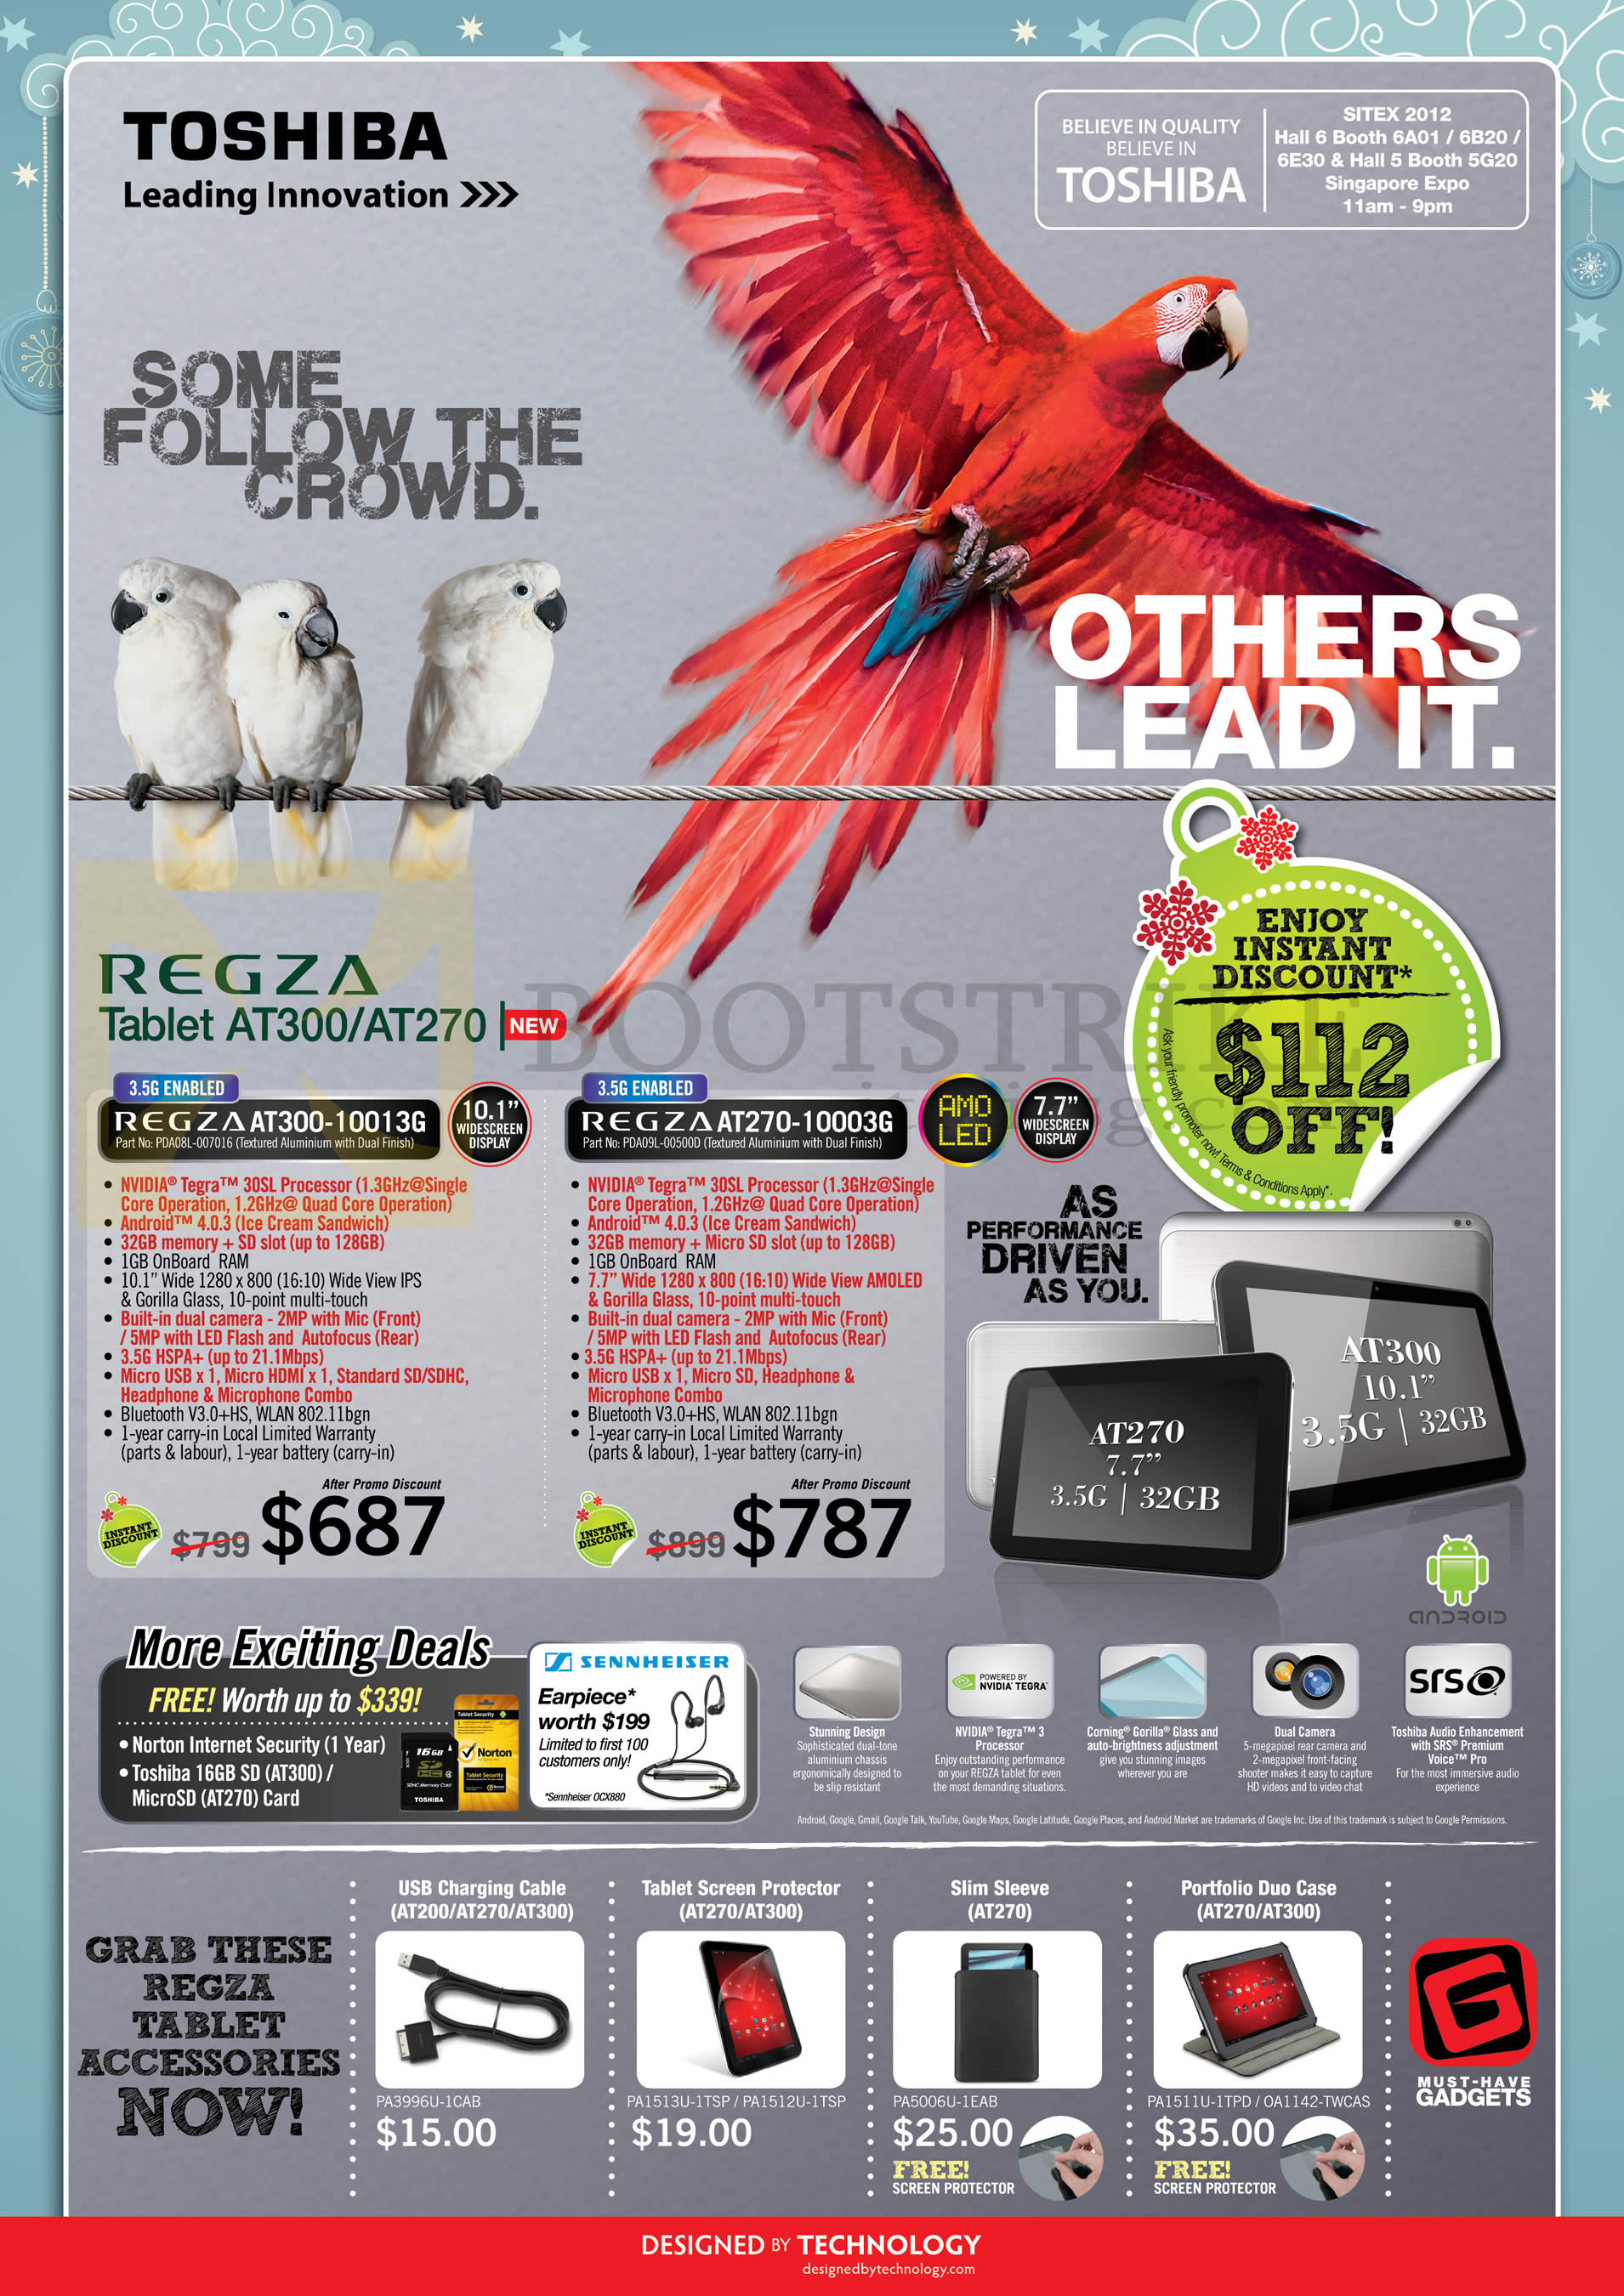 SITEX 2012 price list image brochure of Toshiba Tablets Regza AT300-10013G, AT270-10003G, Accessories